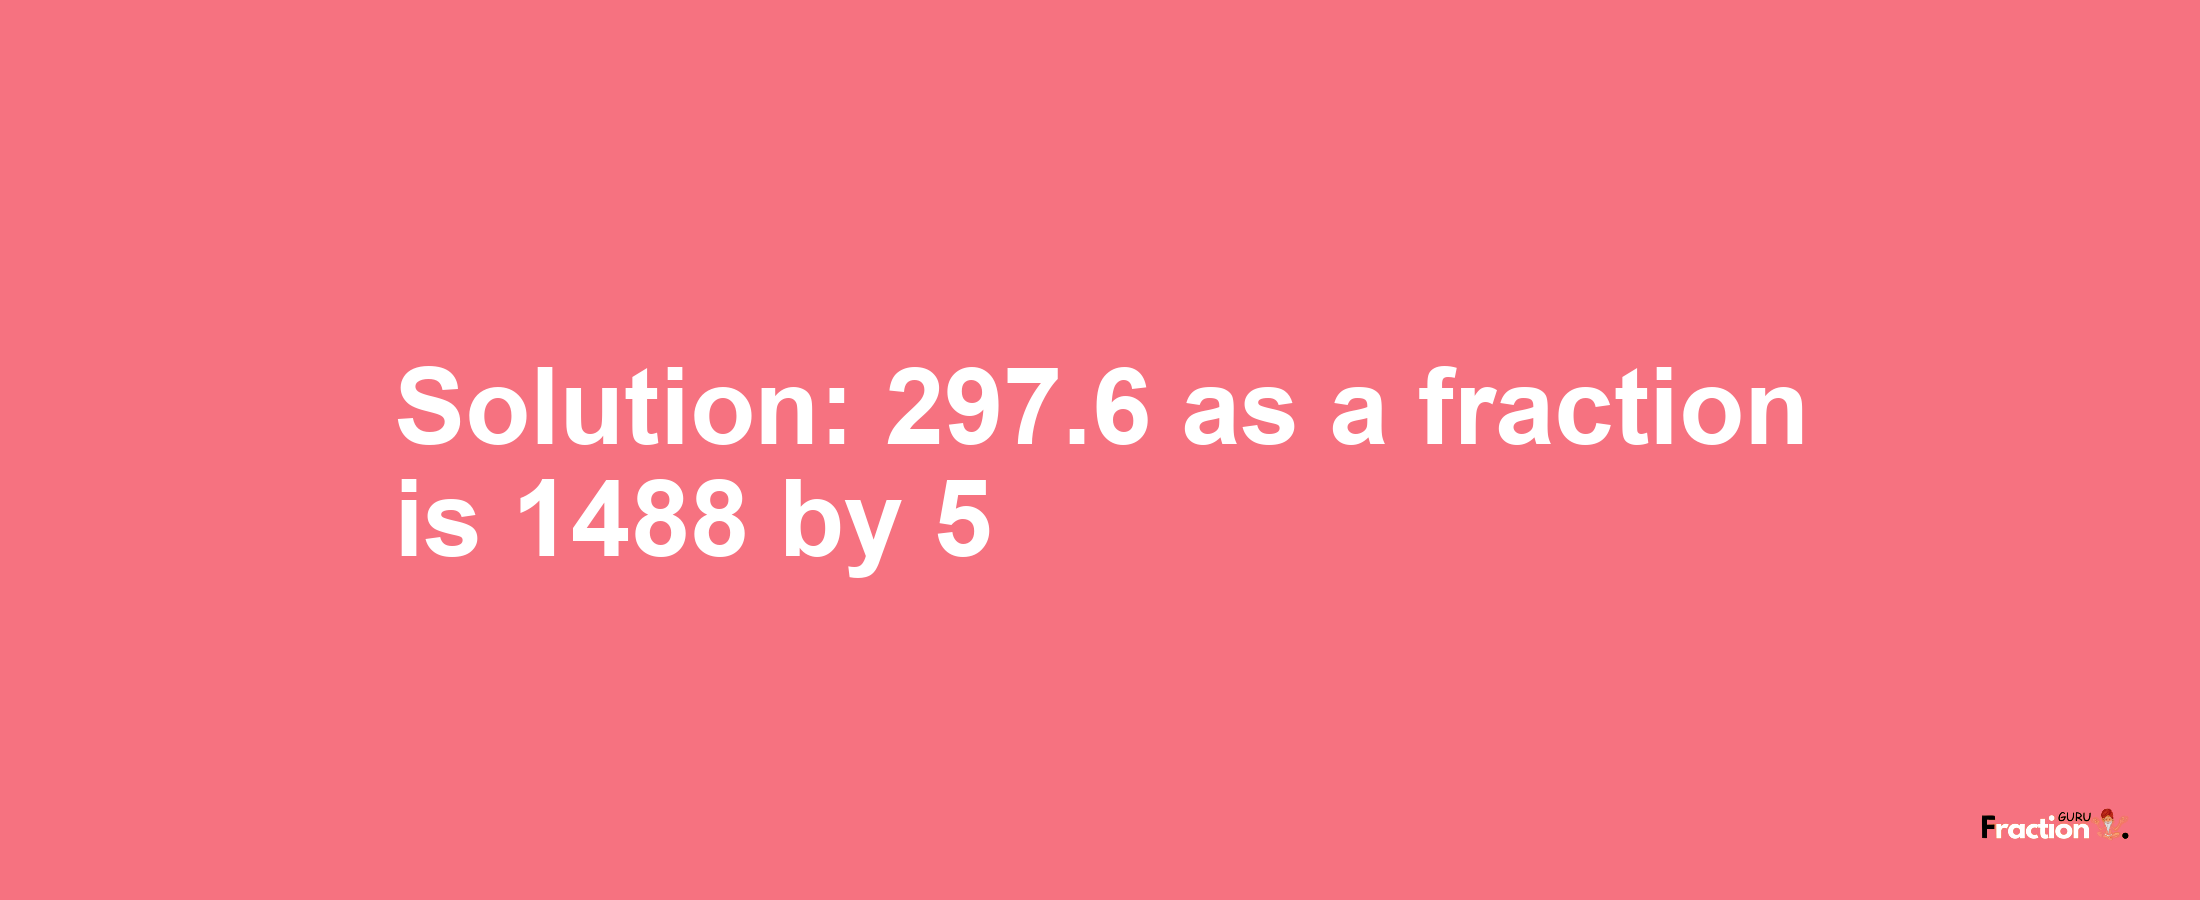 Solution:297.6 as a fraction is 1488/5